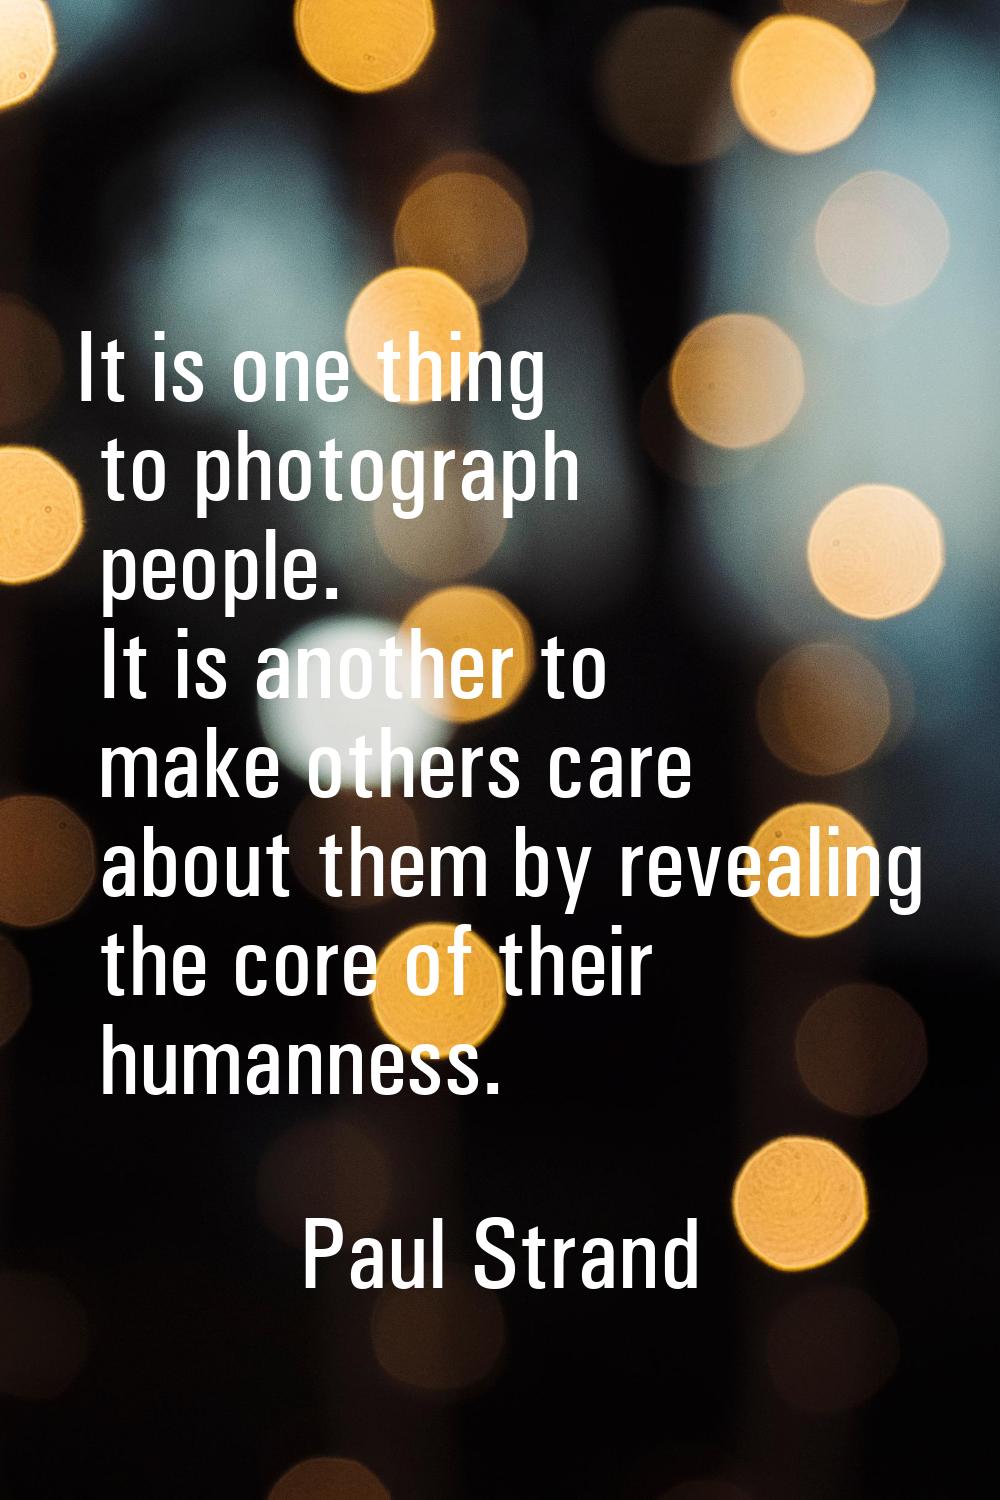 It is one thing to photograph people. It is another to make others care about them by revealing the